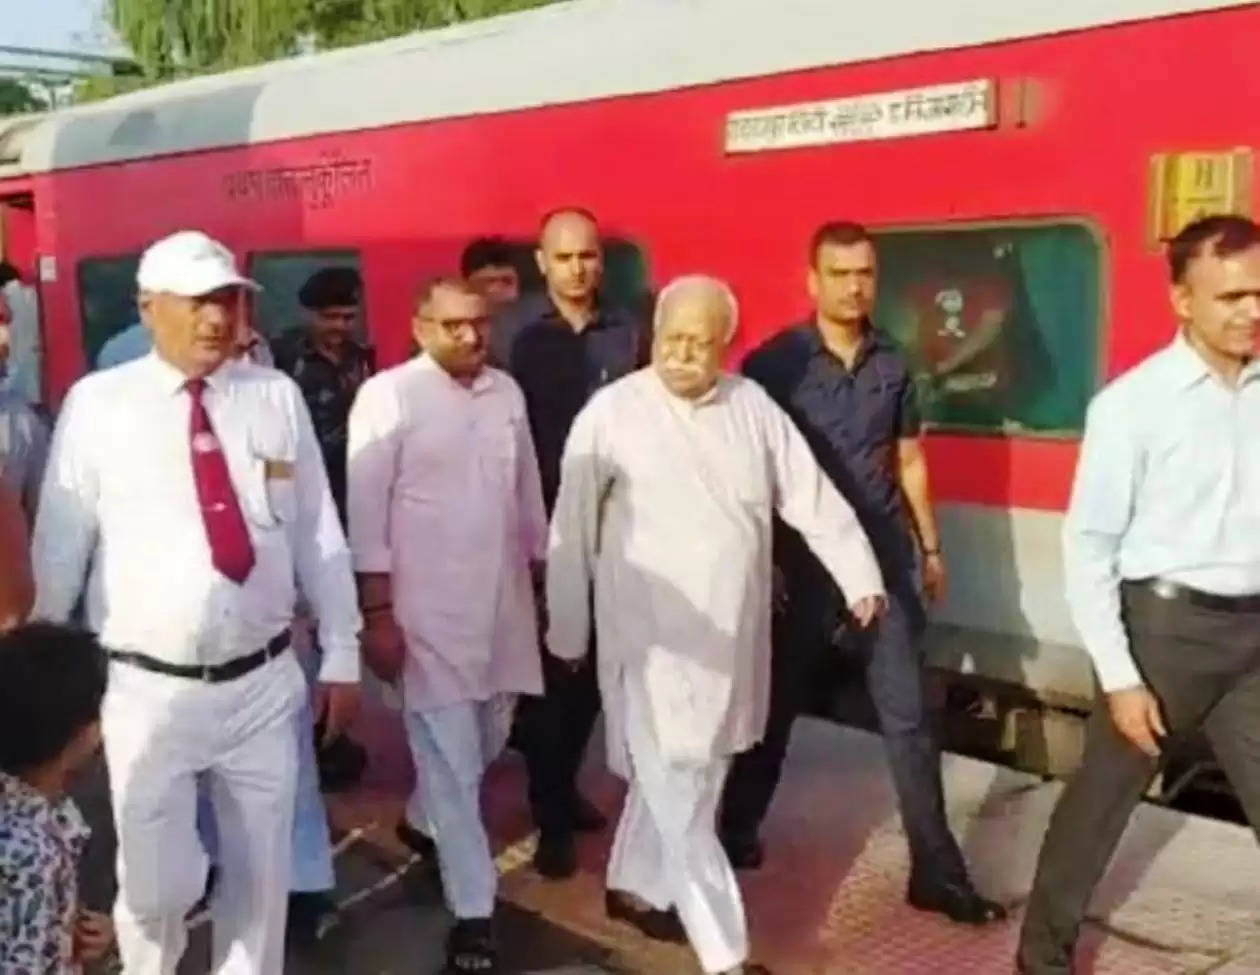 RSS Chief Mohan Bhagwat reached udaipur